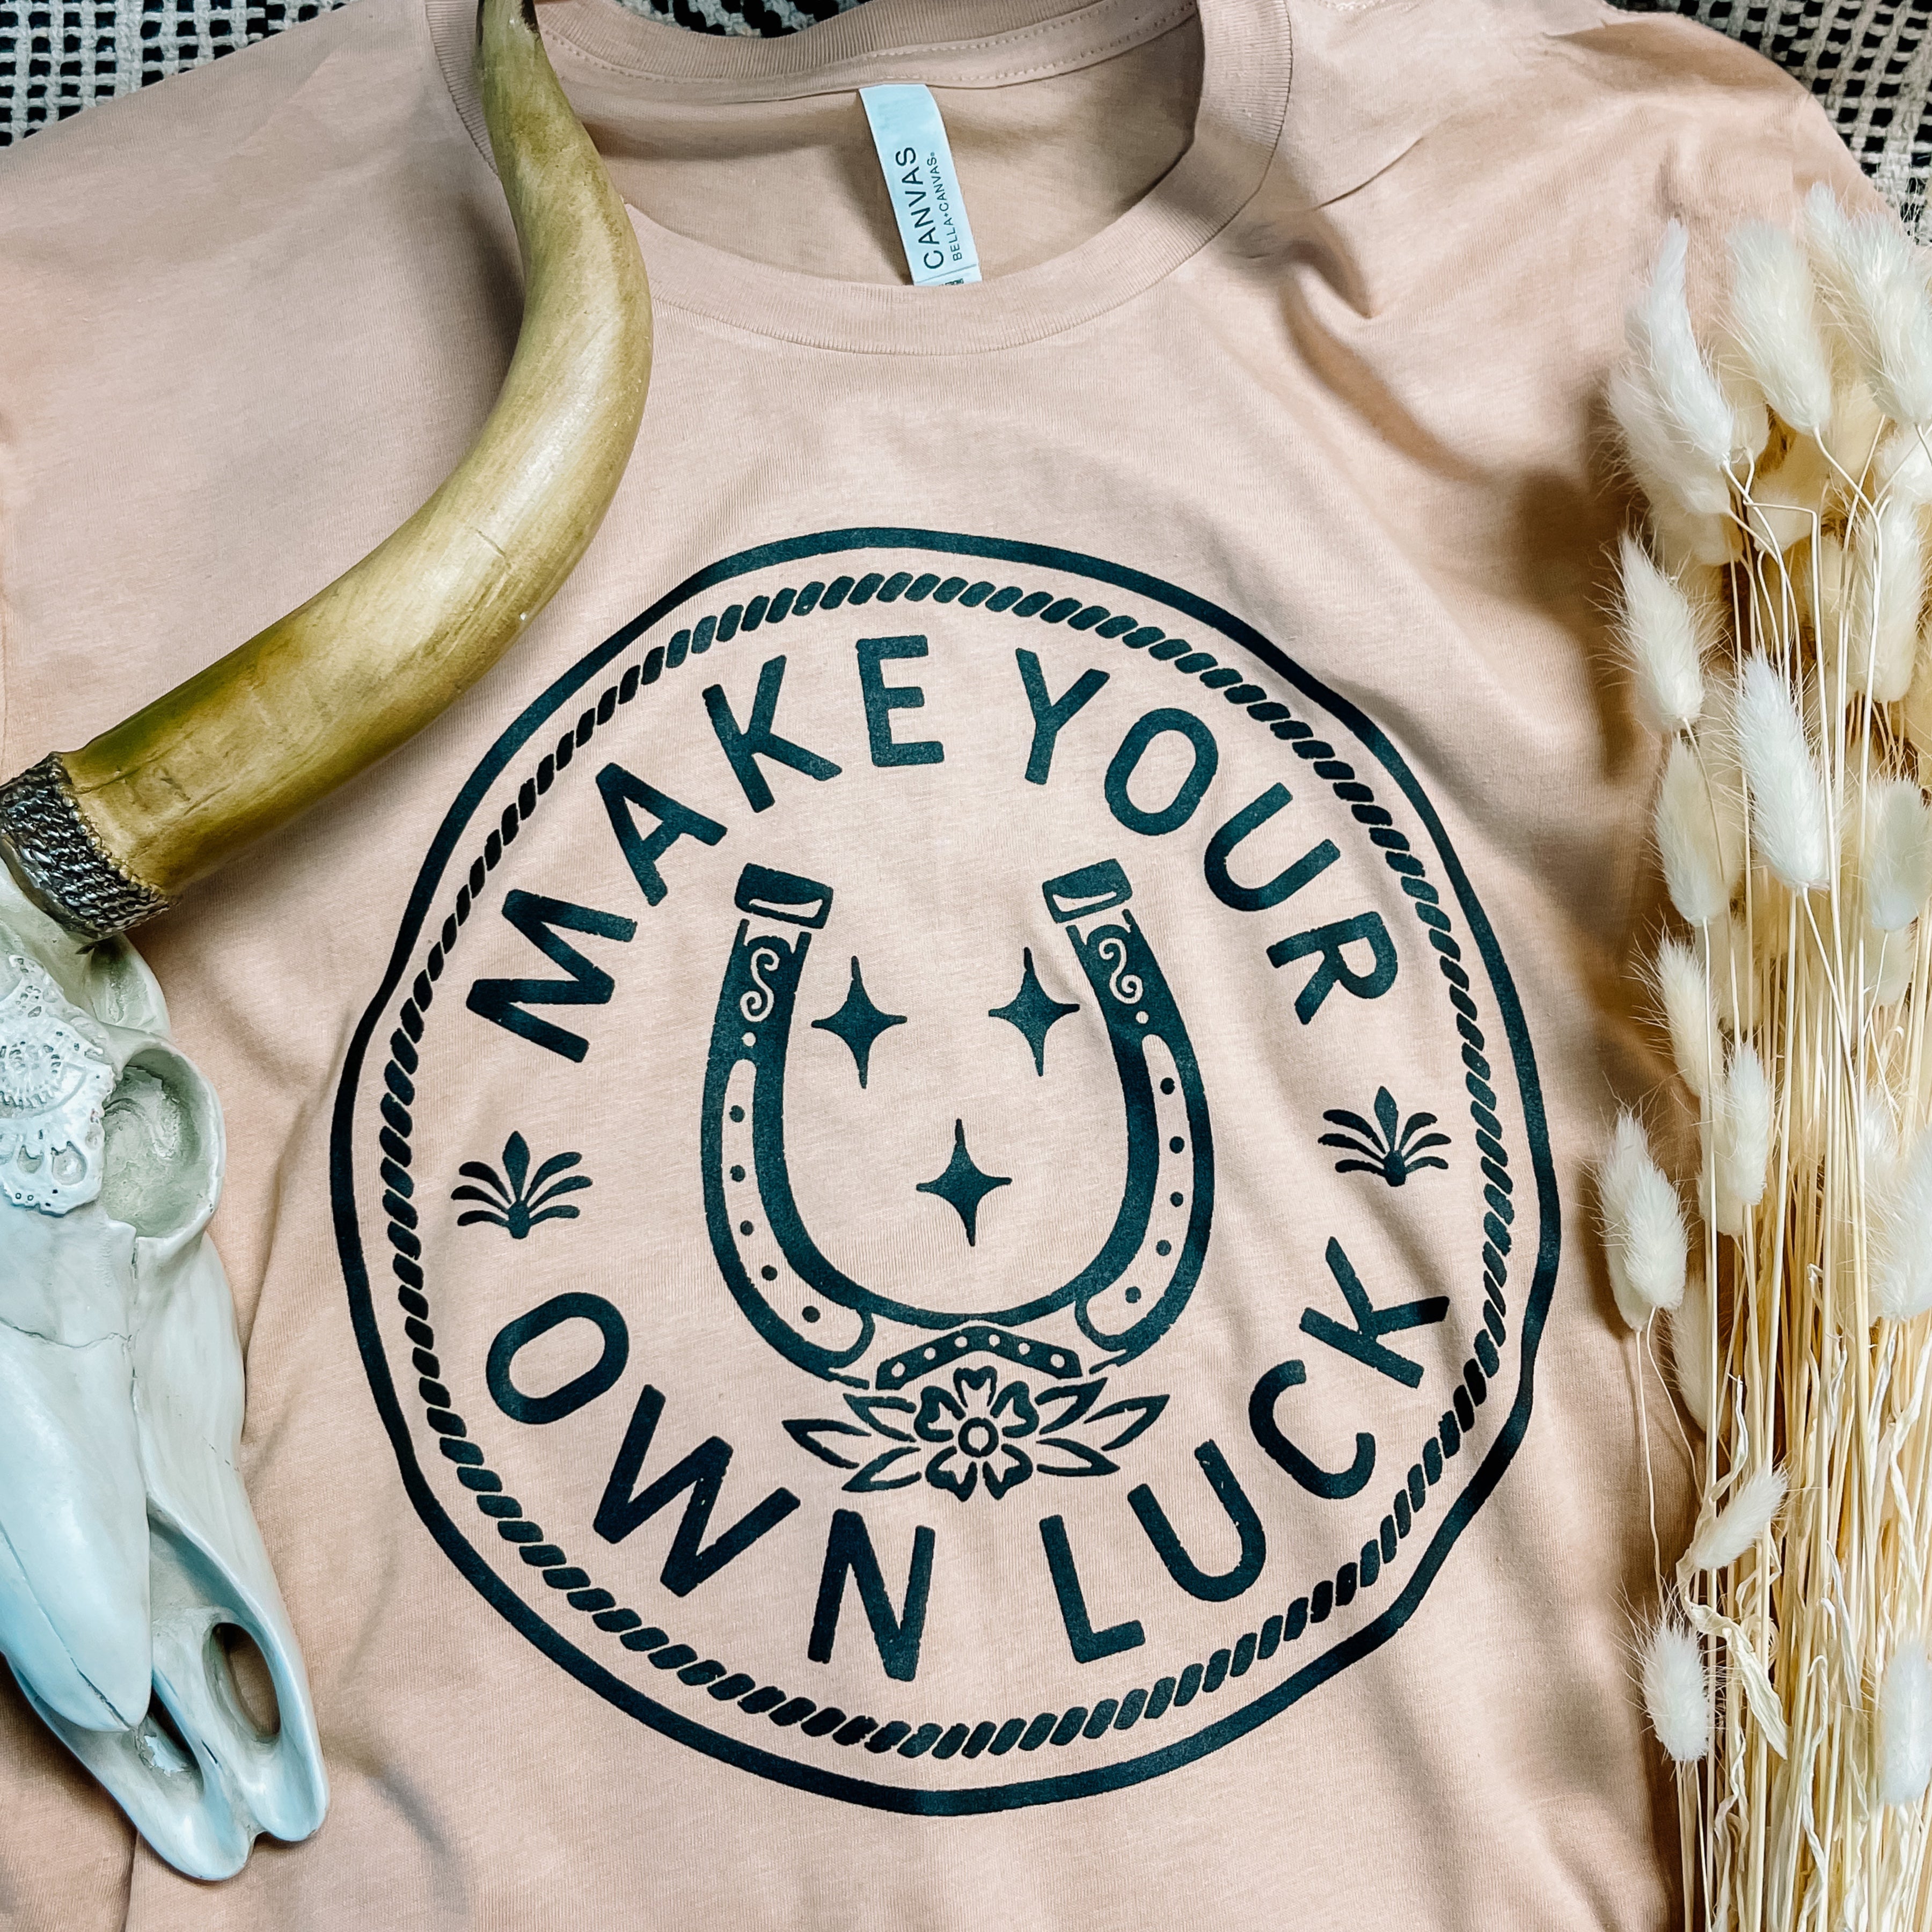 Make Your Own Luck Screen Print Transfer